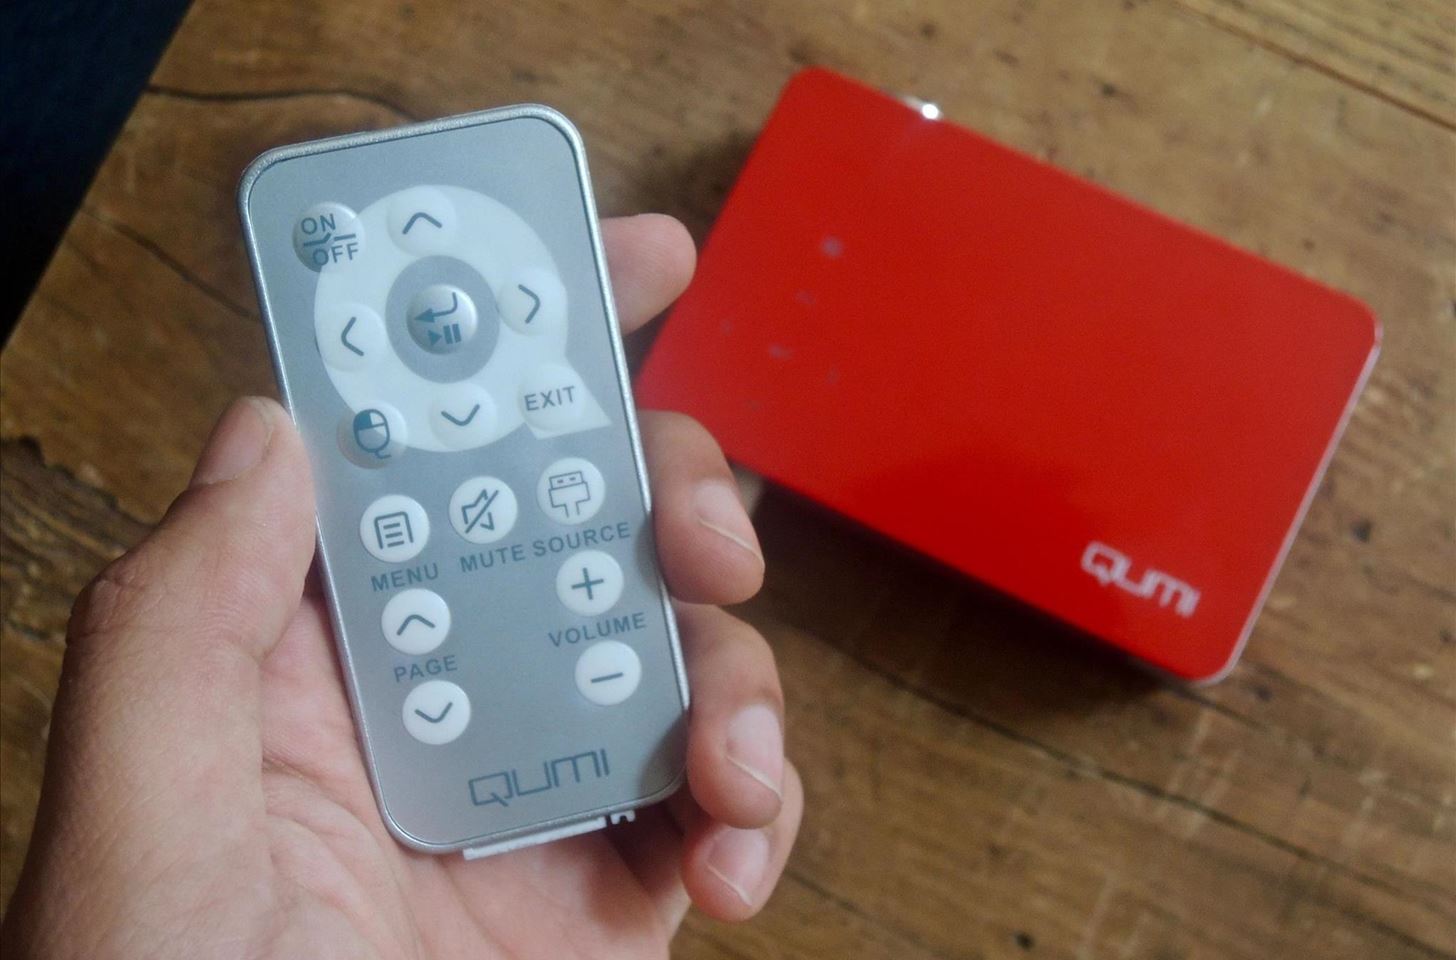 Review: The Qumi Q5 Pocket Projector Is a Solid On-the-Go Media Companion